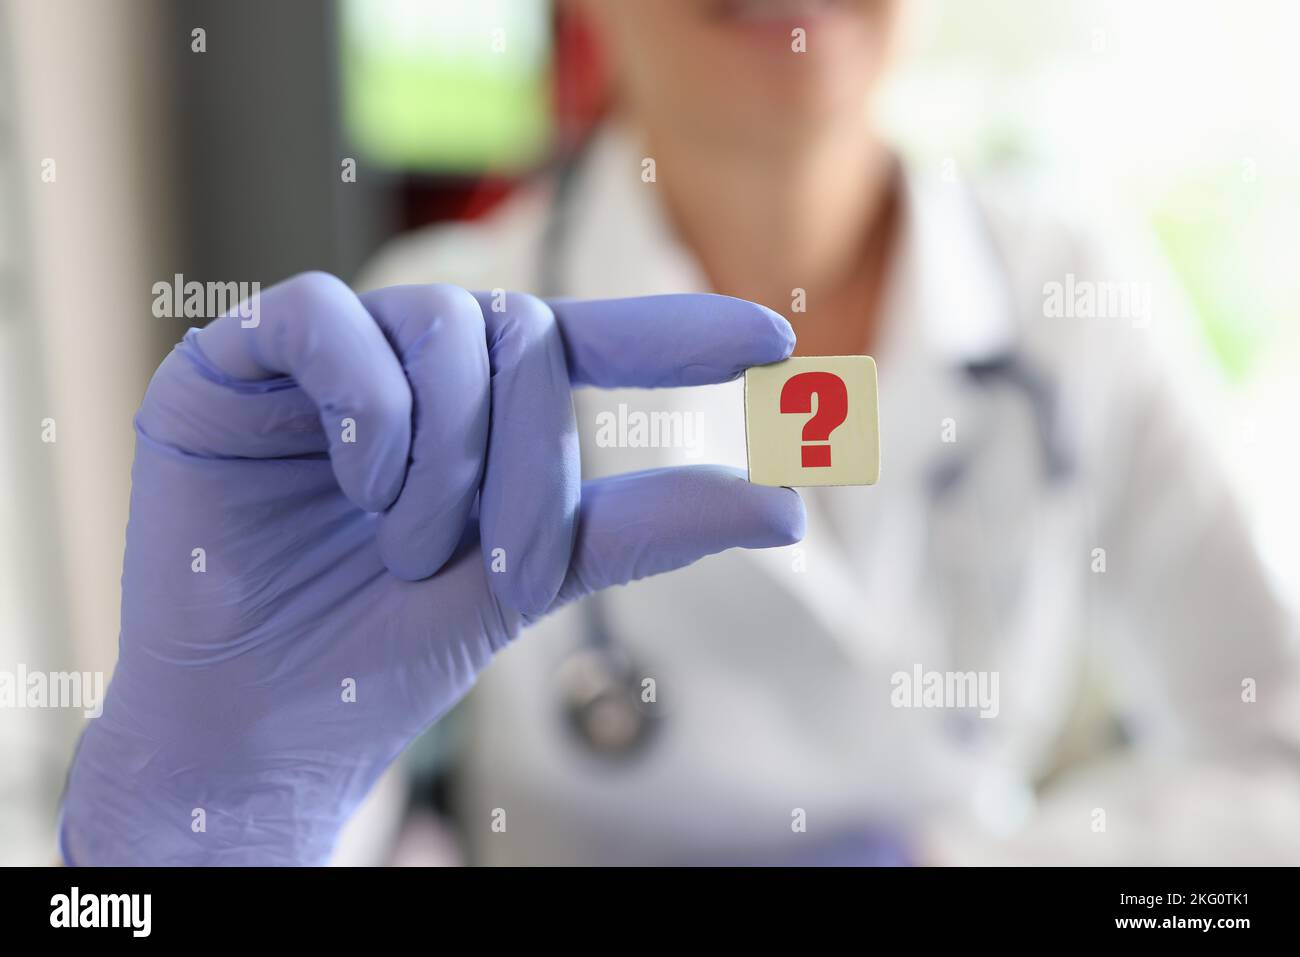 Female doctor hand in glove holding question mark sign Stock Photo